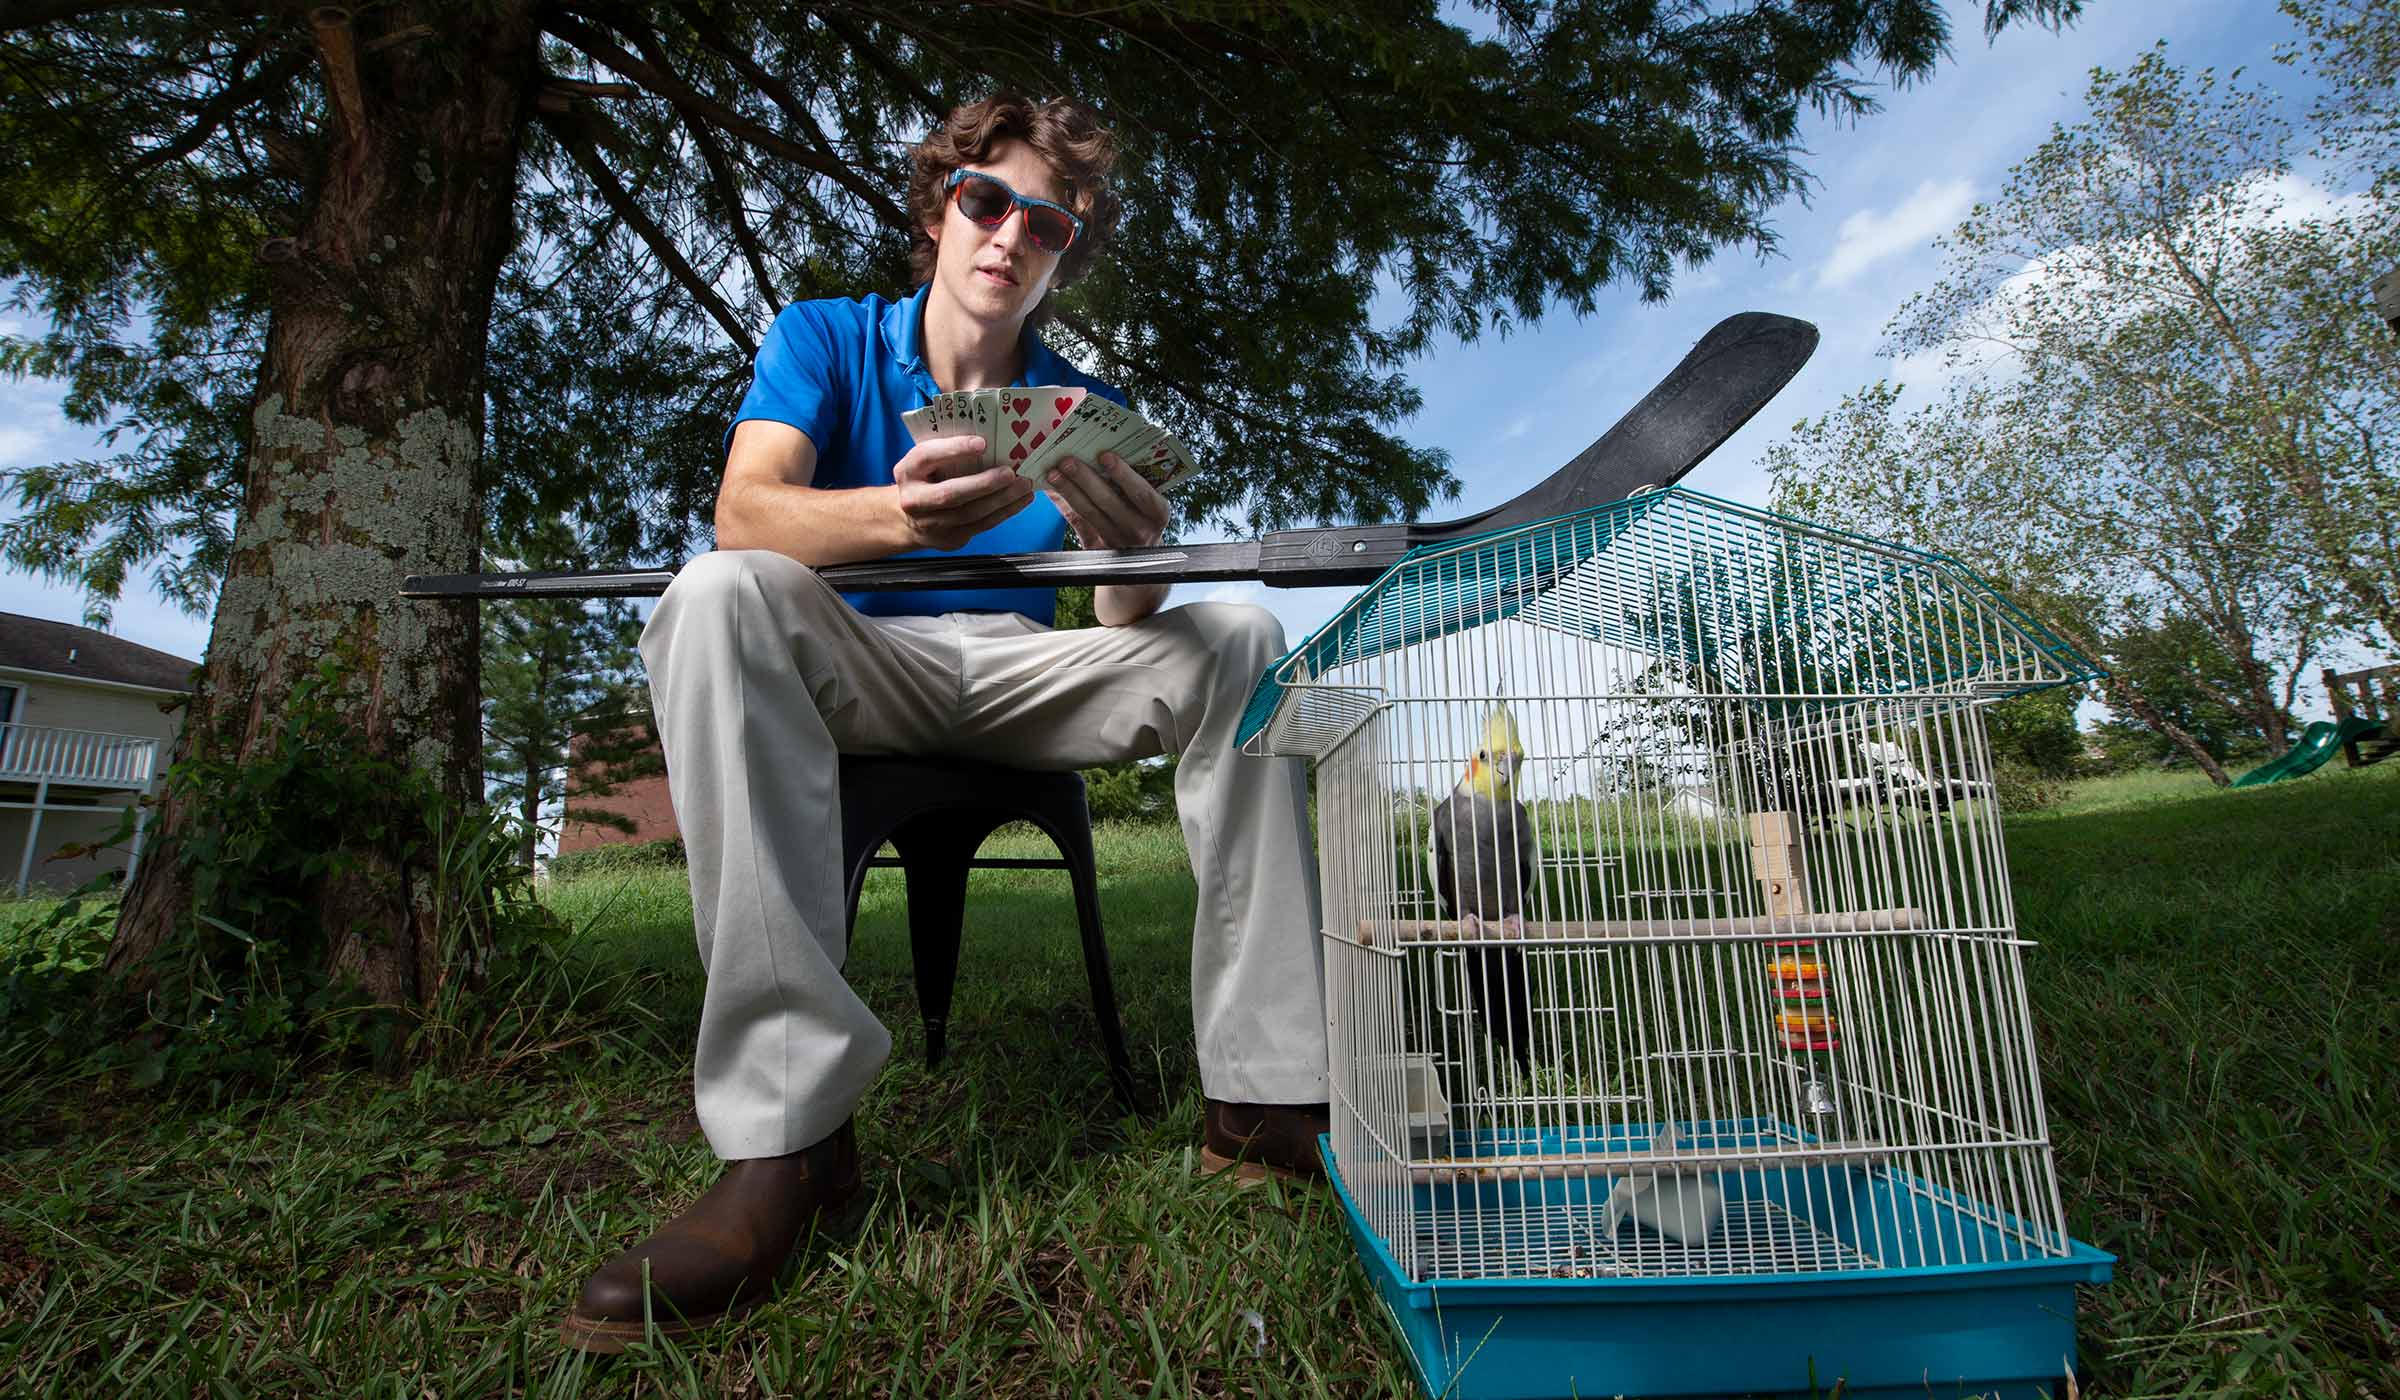 Sean Moskal, pictured outside with his pet bird.